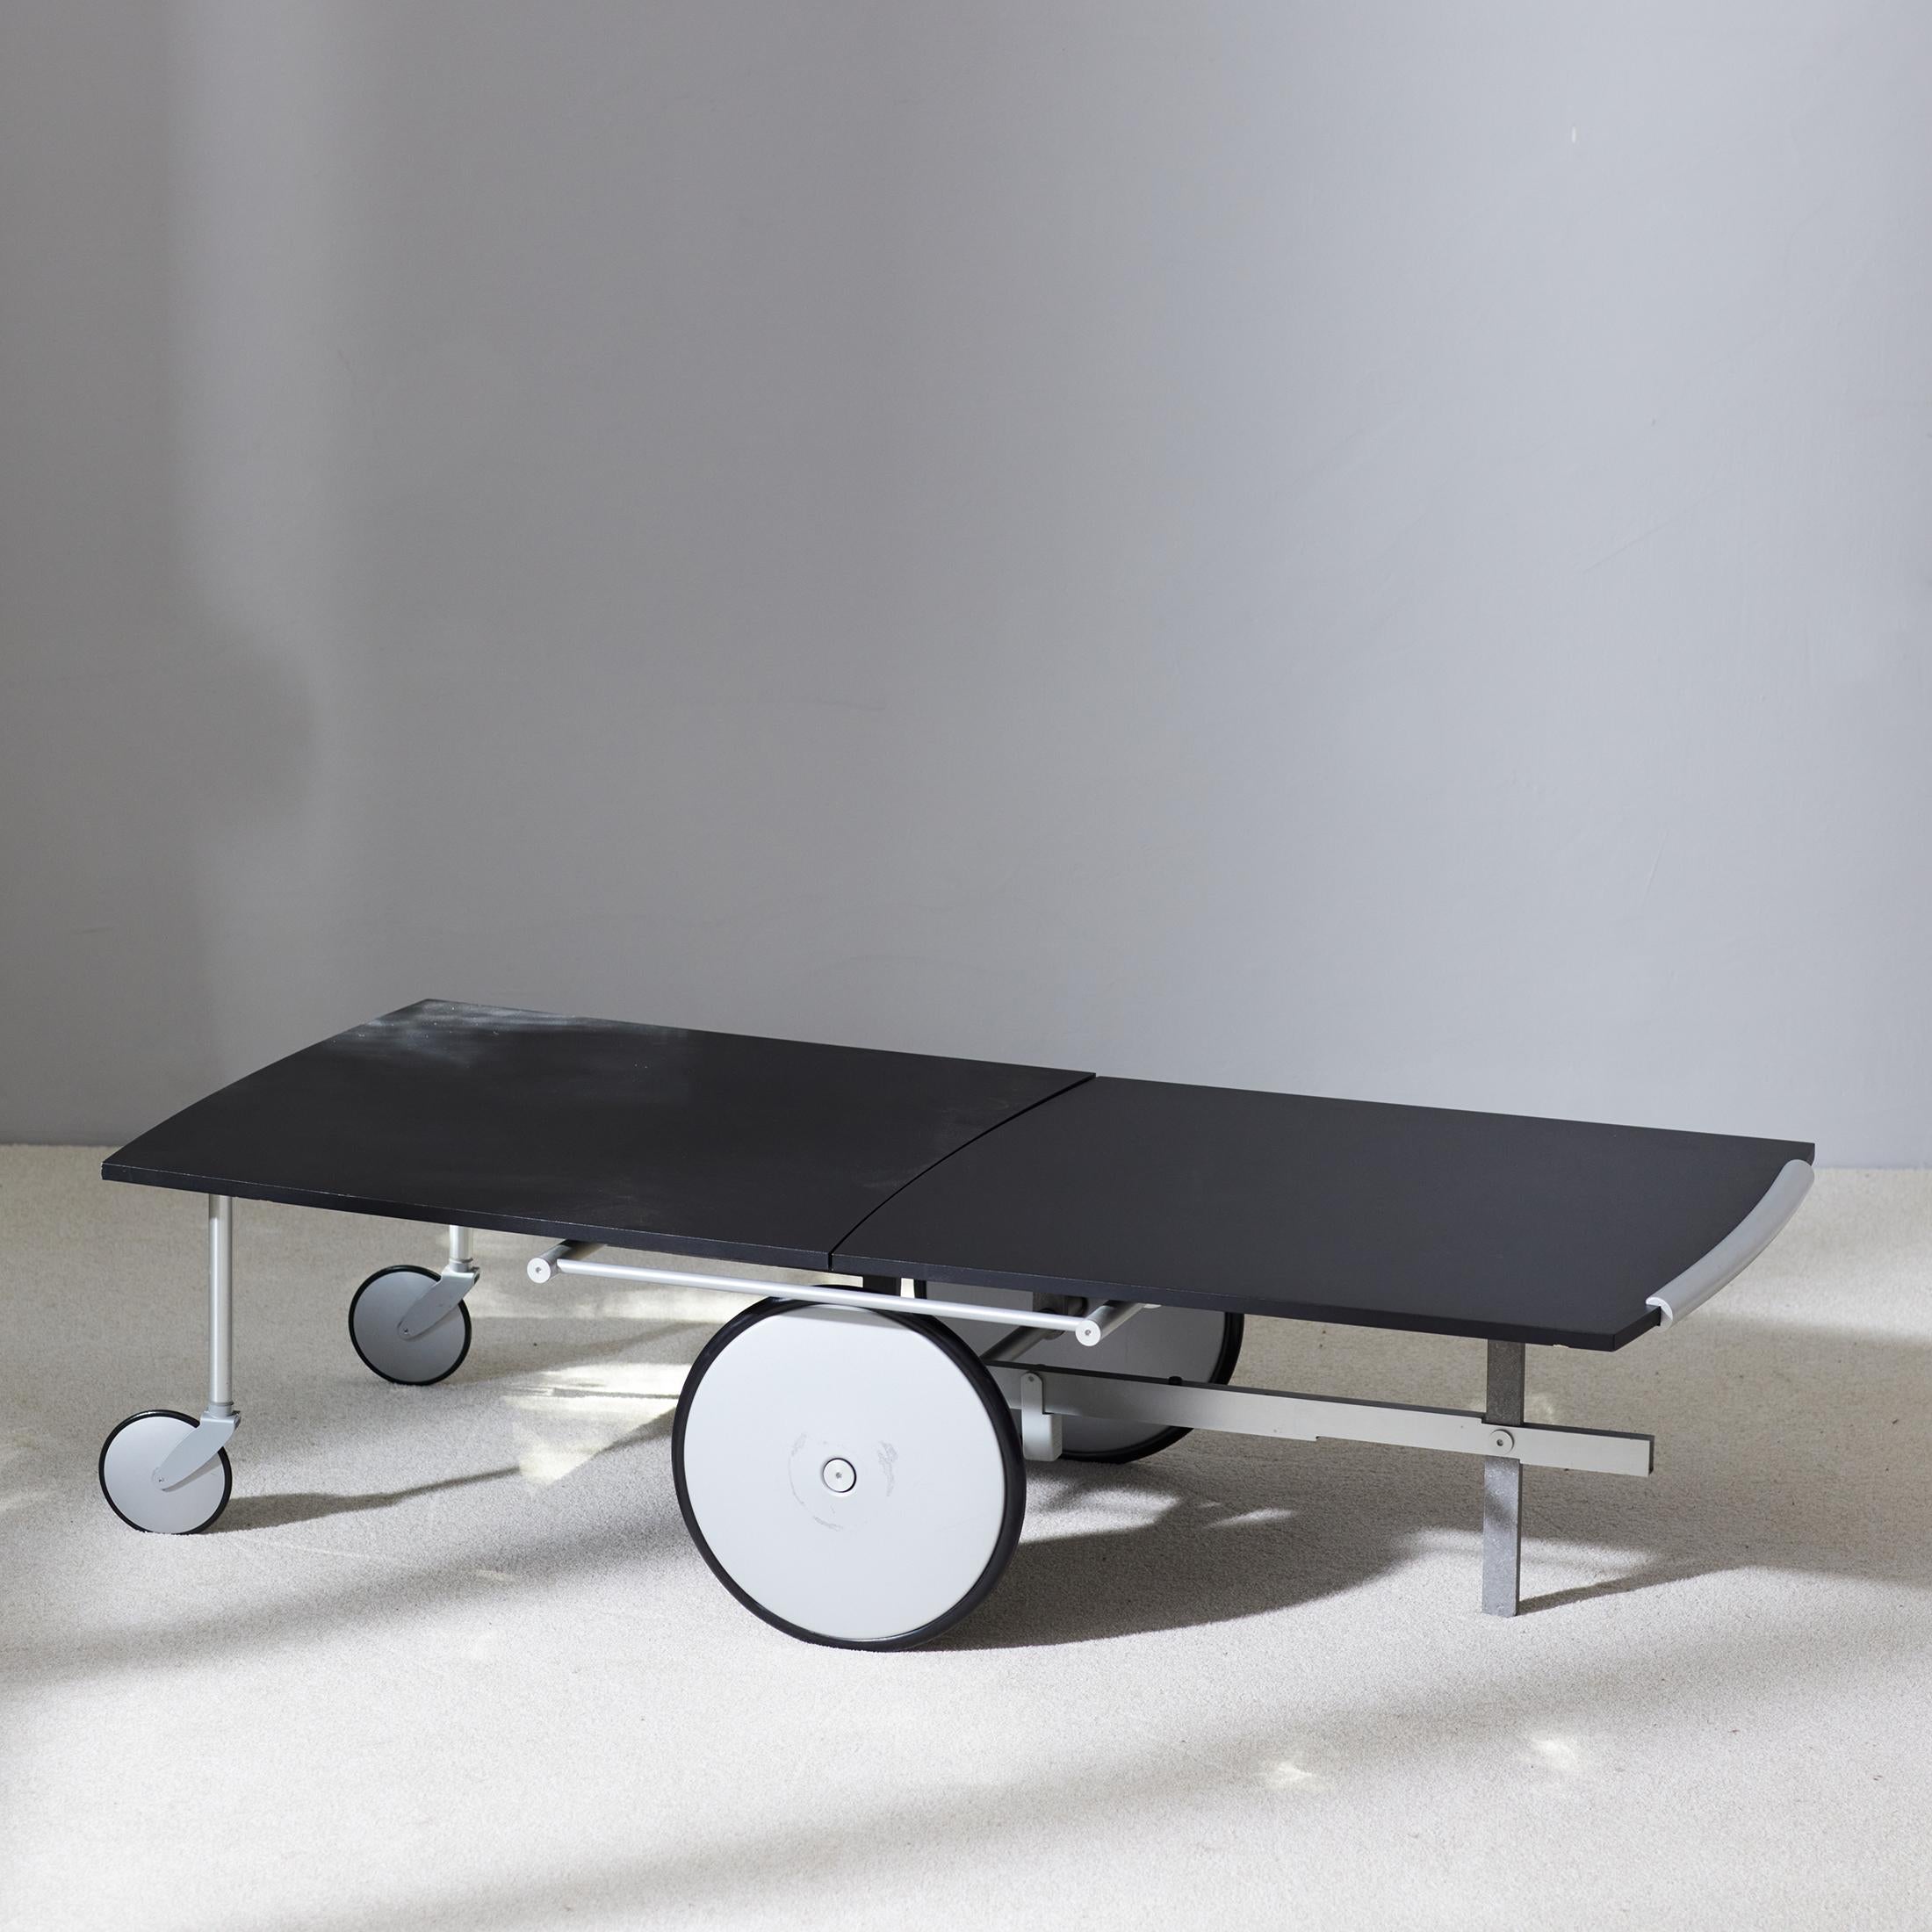 Raul Barbieri and Giorgio Marianelli are Italian industrial designers and architects. They have worked together for many years and created elegant and funcional pieces such as this unique Convertible Trolley / Coffee Table for Ycami from 1990.
The